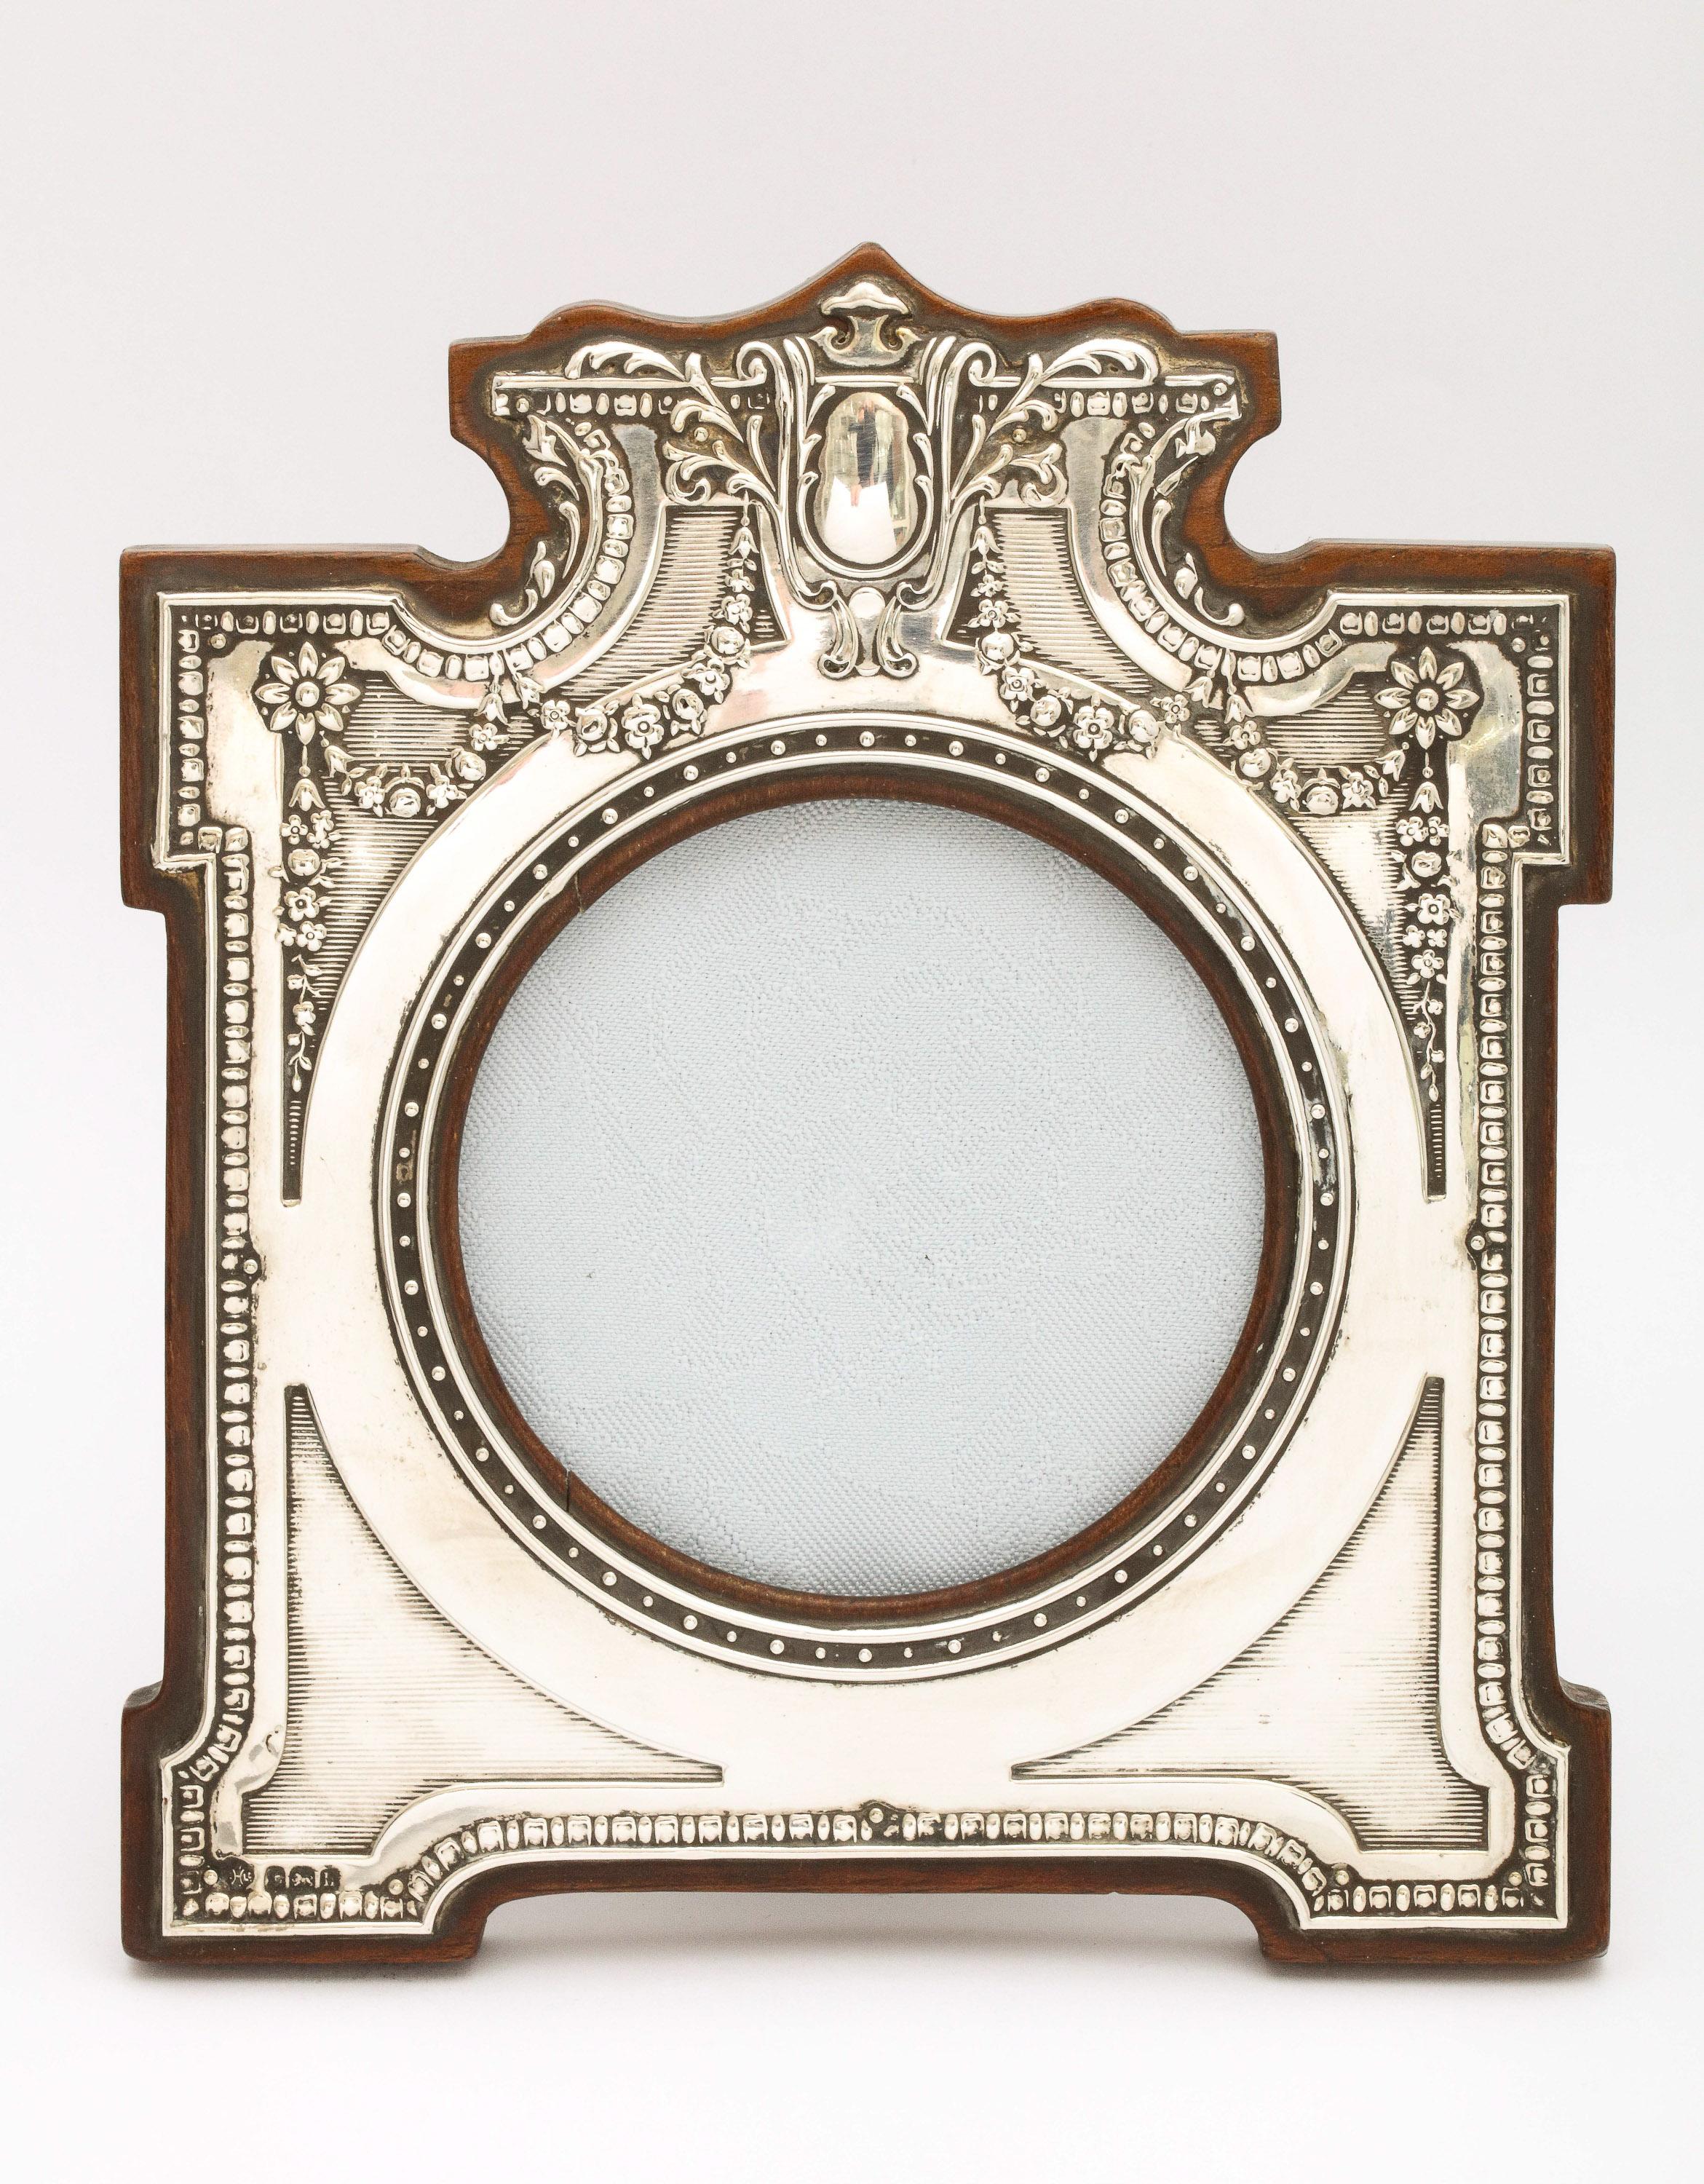 Unusual, Edwardian, sterling silver picture frame with wood back, Birmingham, England, year-hallmarked for 1907, William Hutton and Sons, Ltd. - makers. Vacant cartouche. Frame measures 7 inches high (at highest point) x 6 1/4 inches wide (at widest